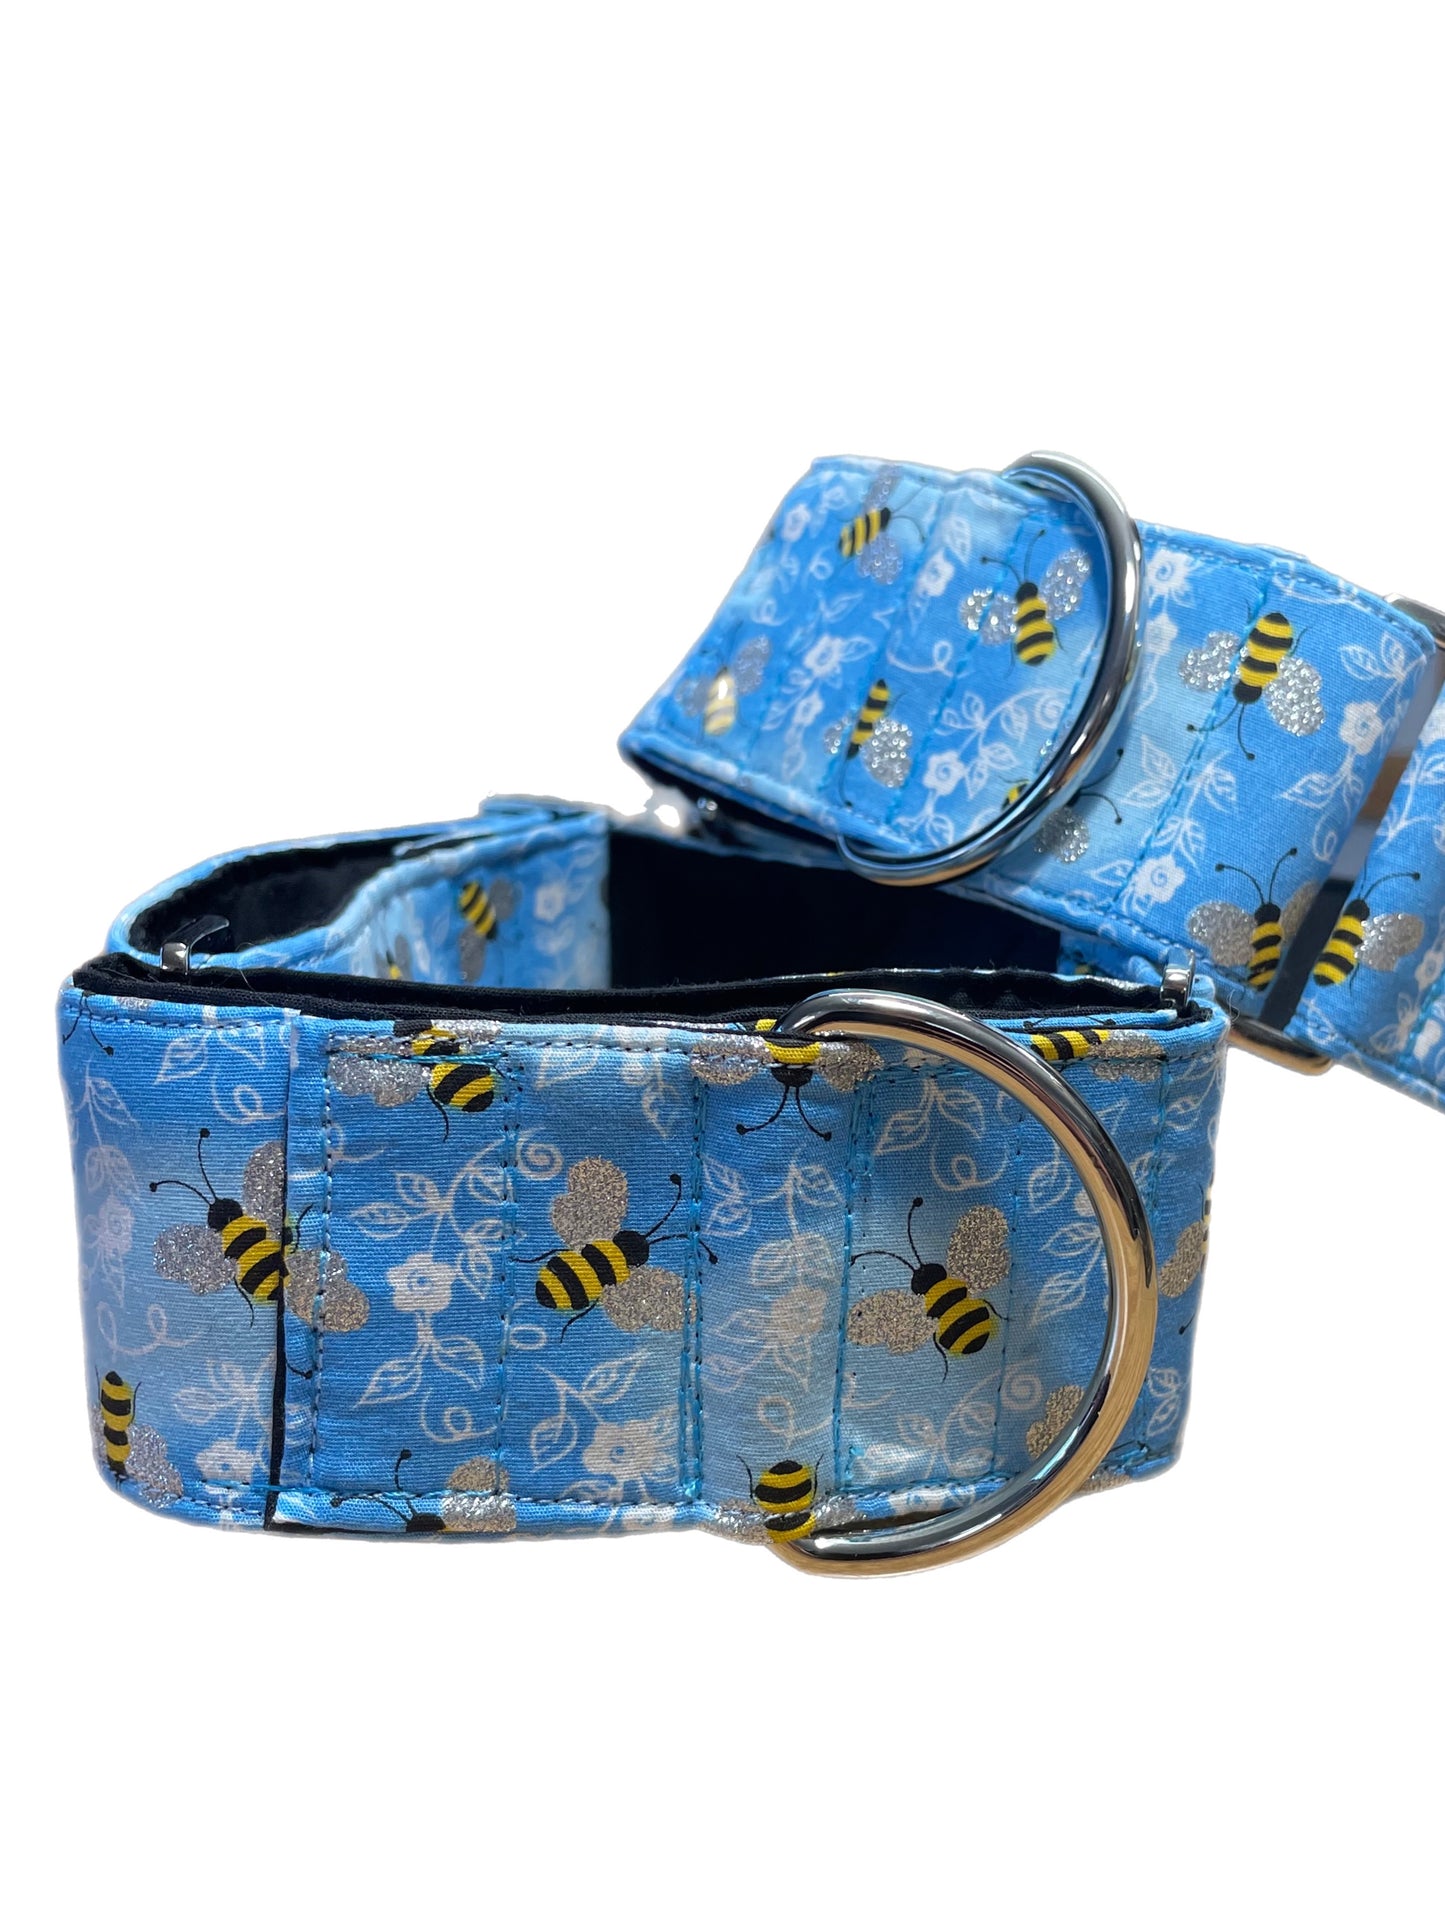 Don’t bee blue sparkles greyhound Martingale collar cotton covered 50mm width super soft whippet